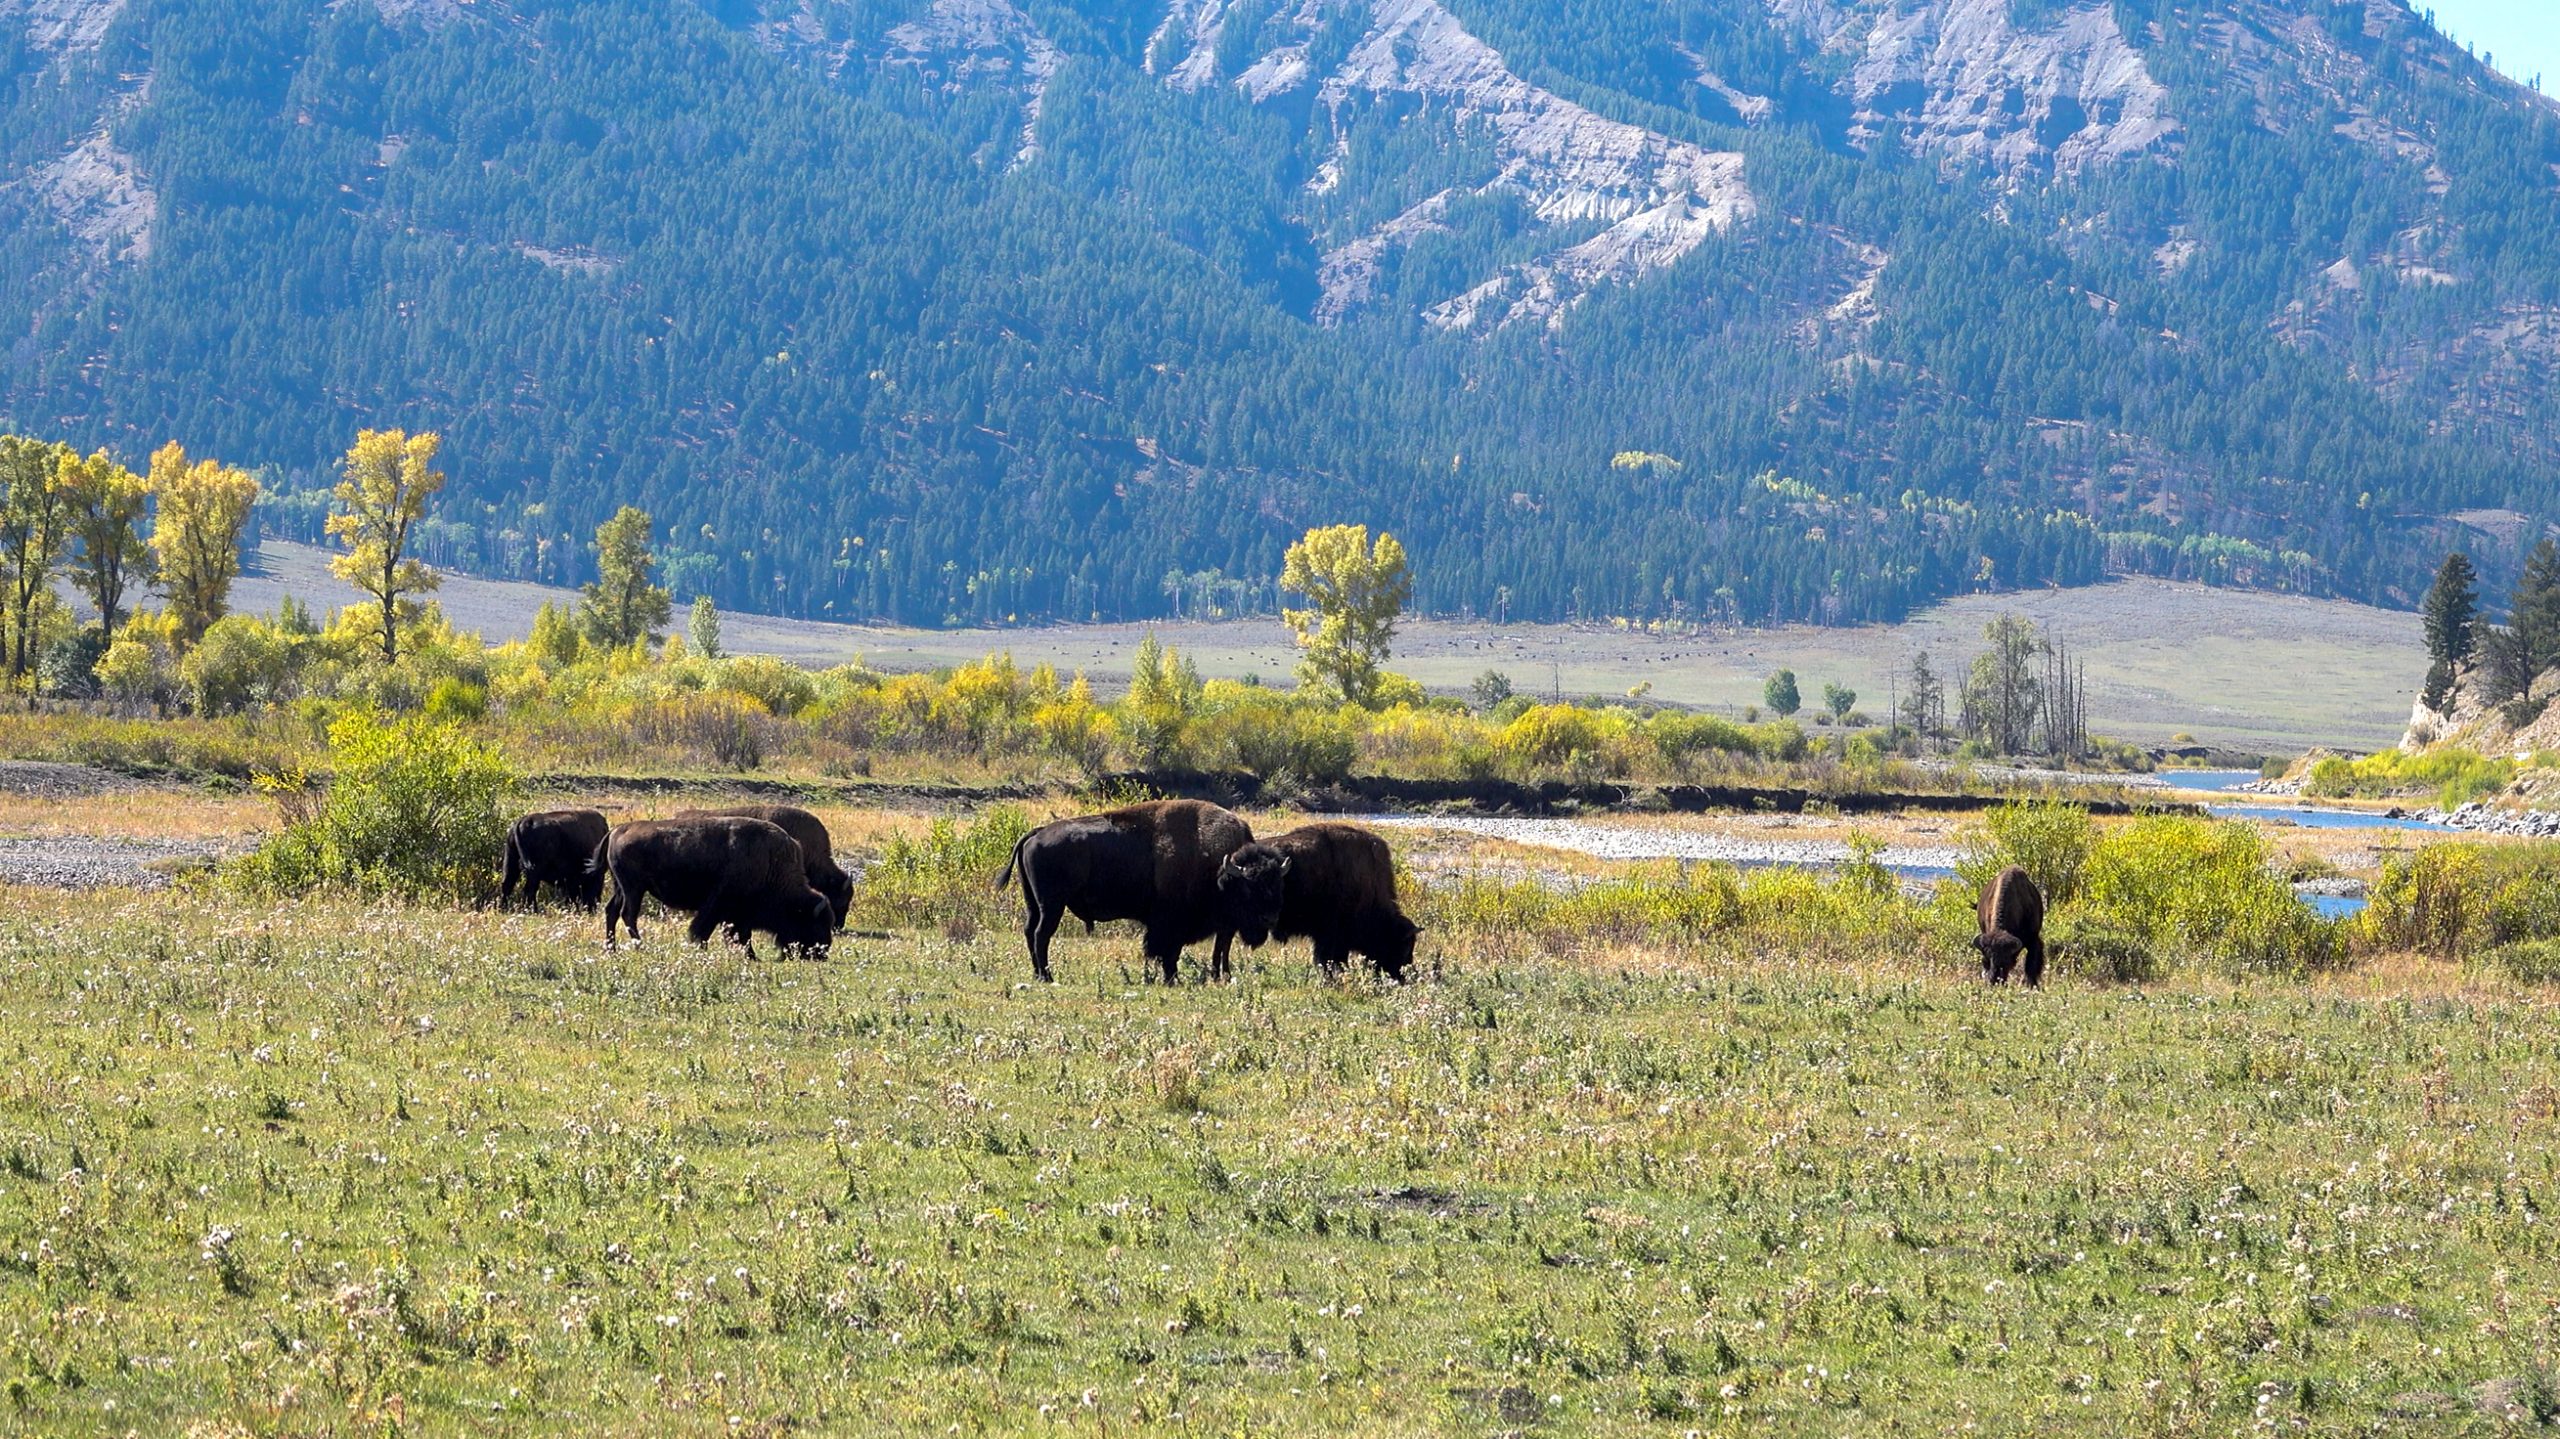 The Bison of Yellowstone